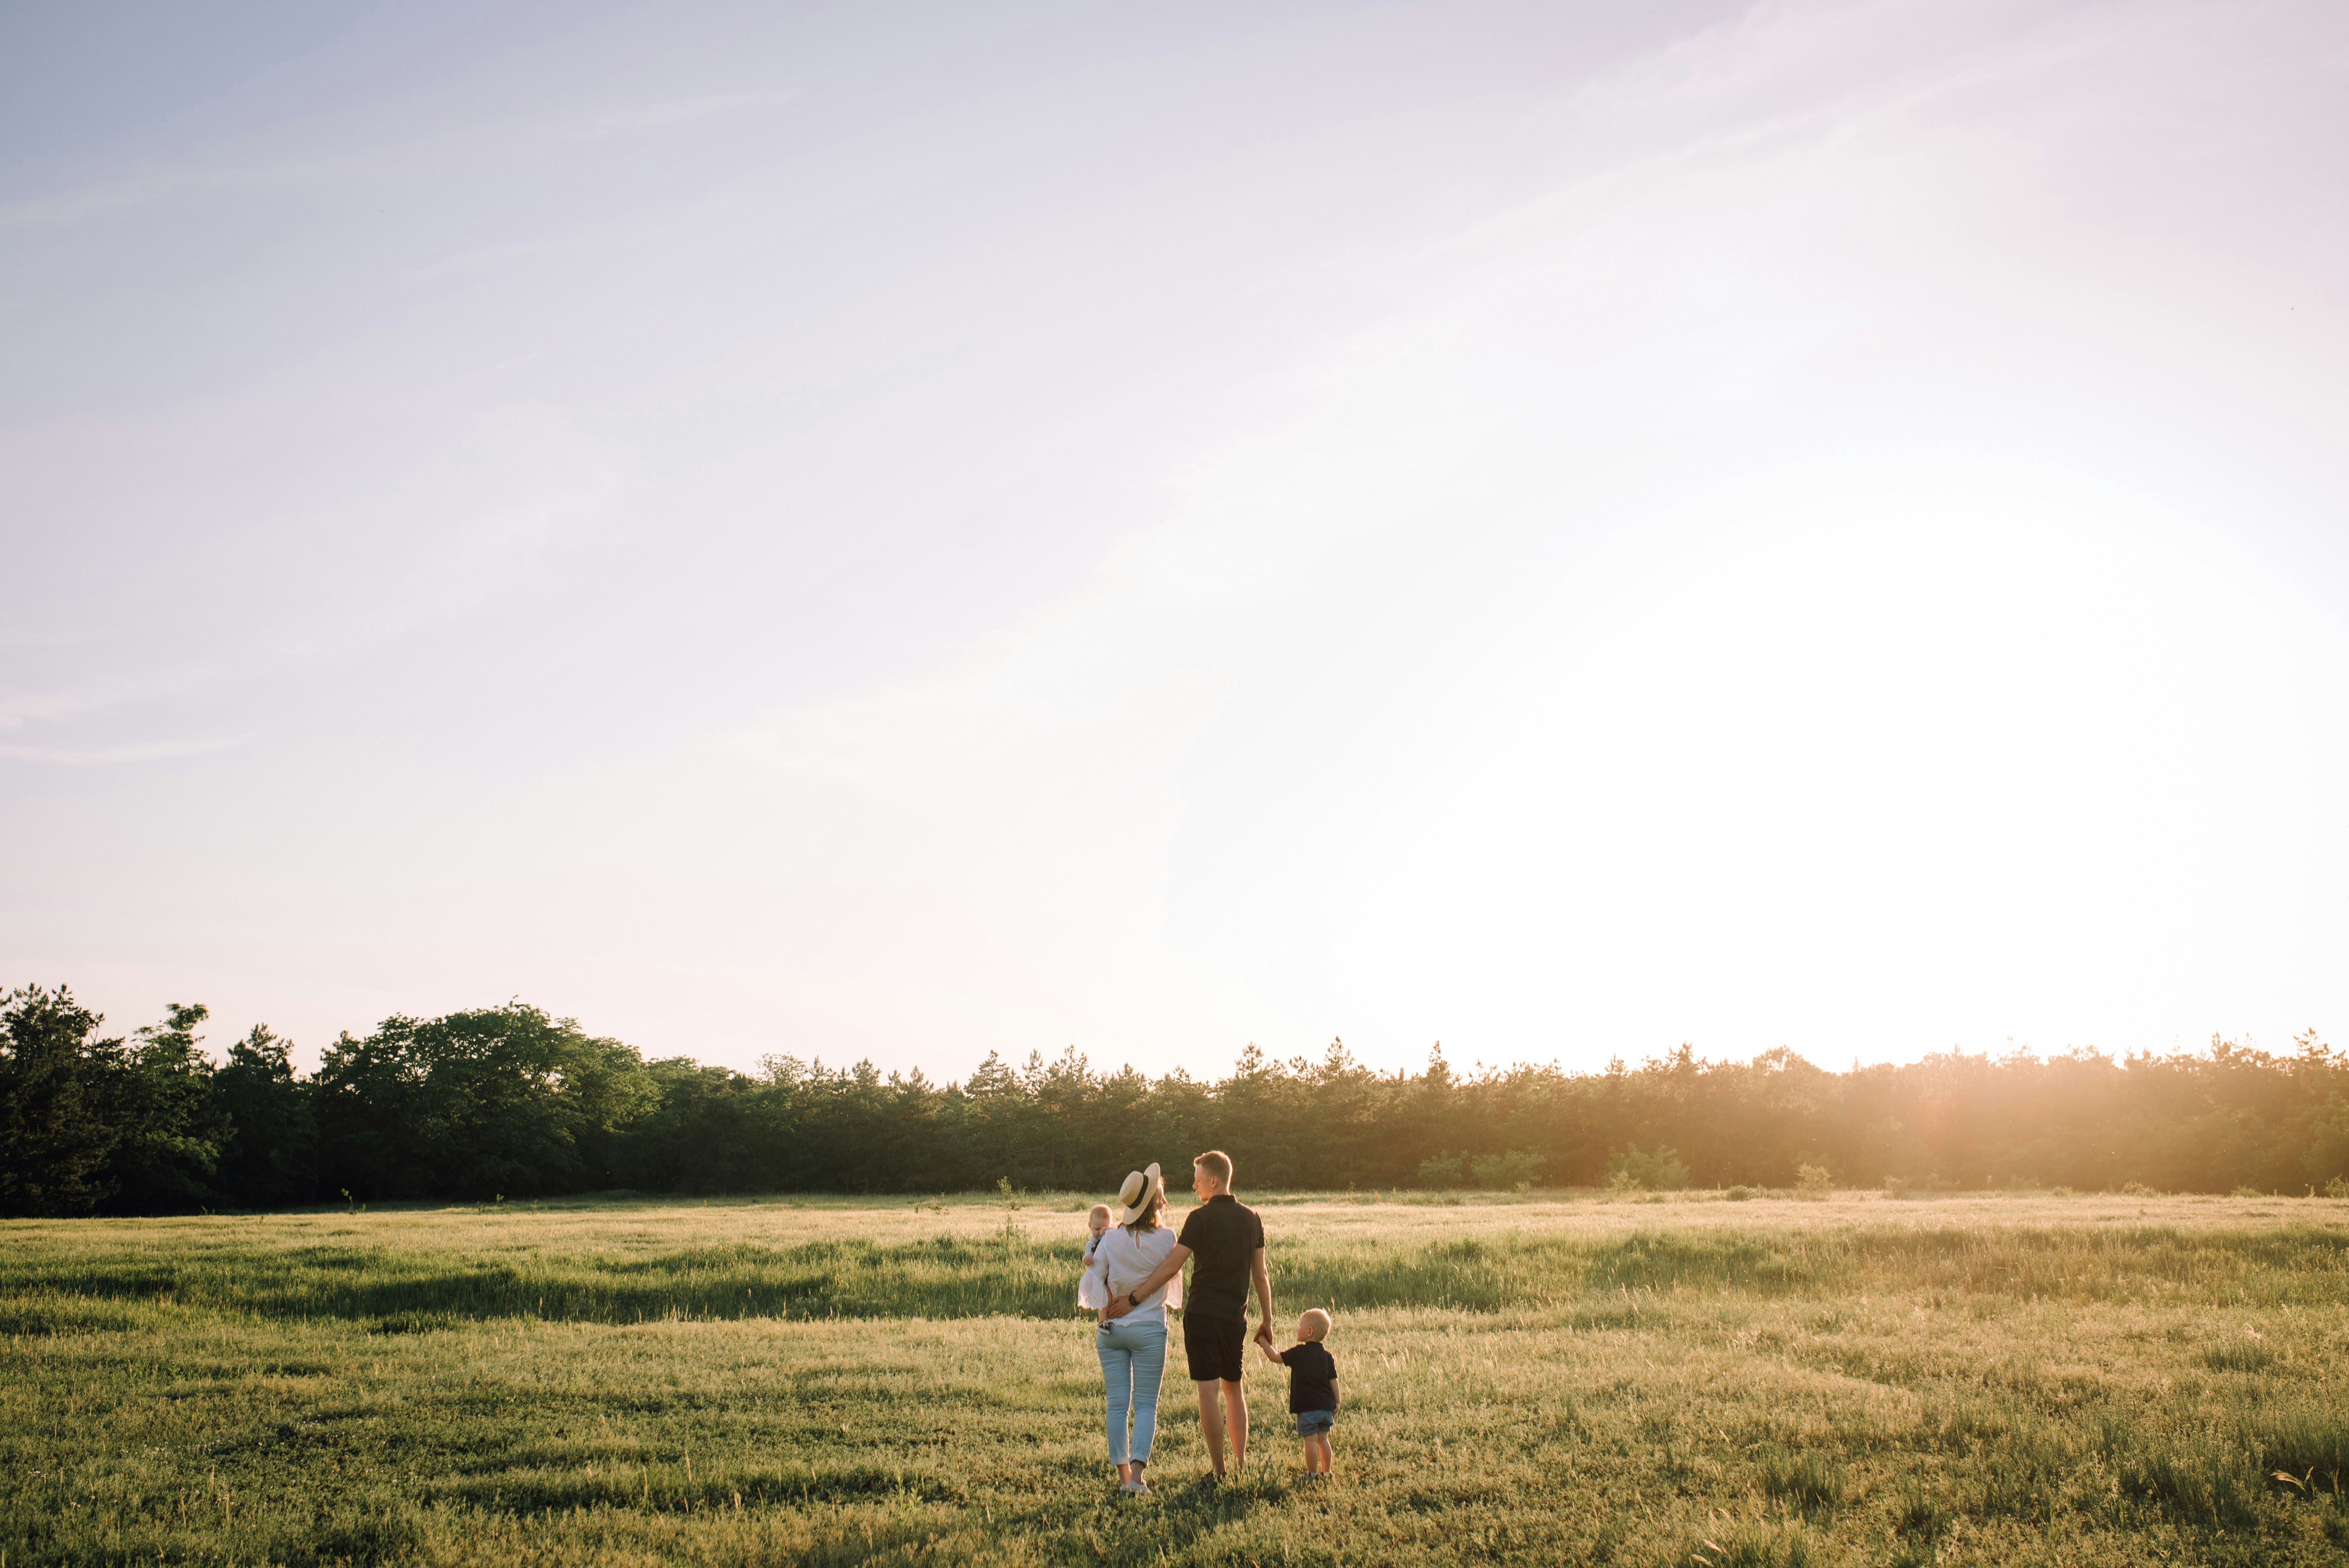 Happy family in a field | Source: Pexels